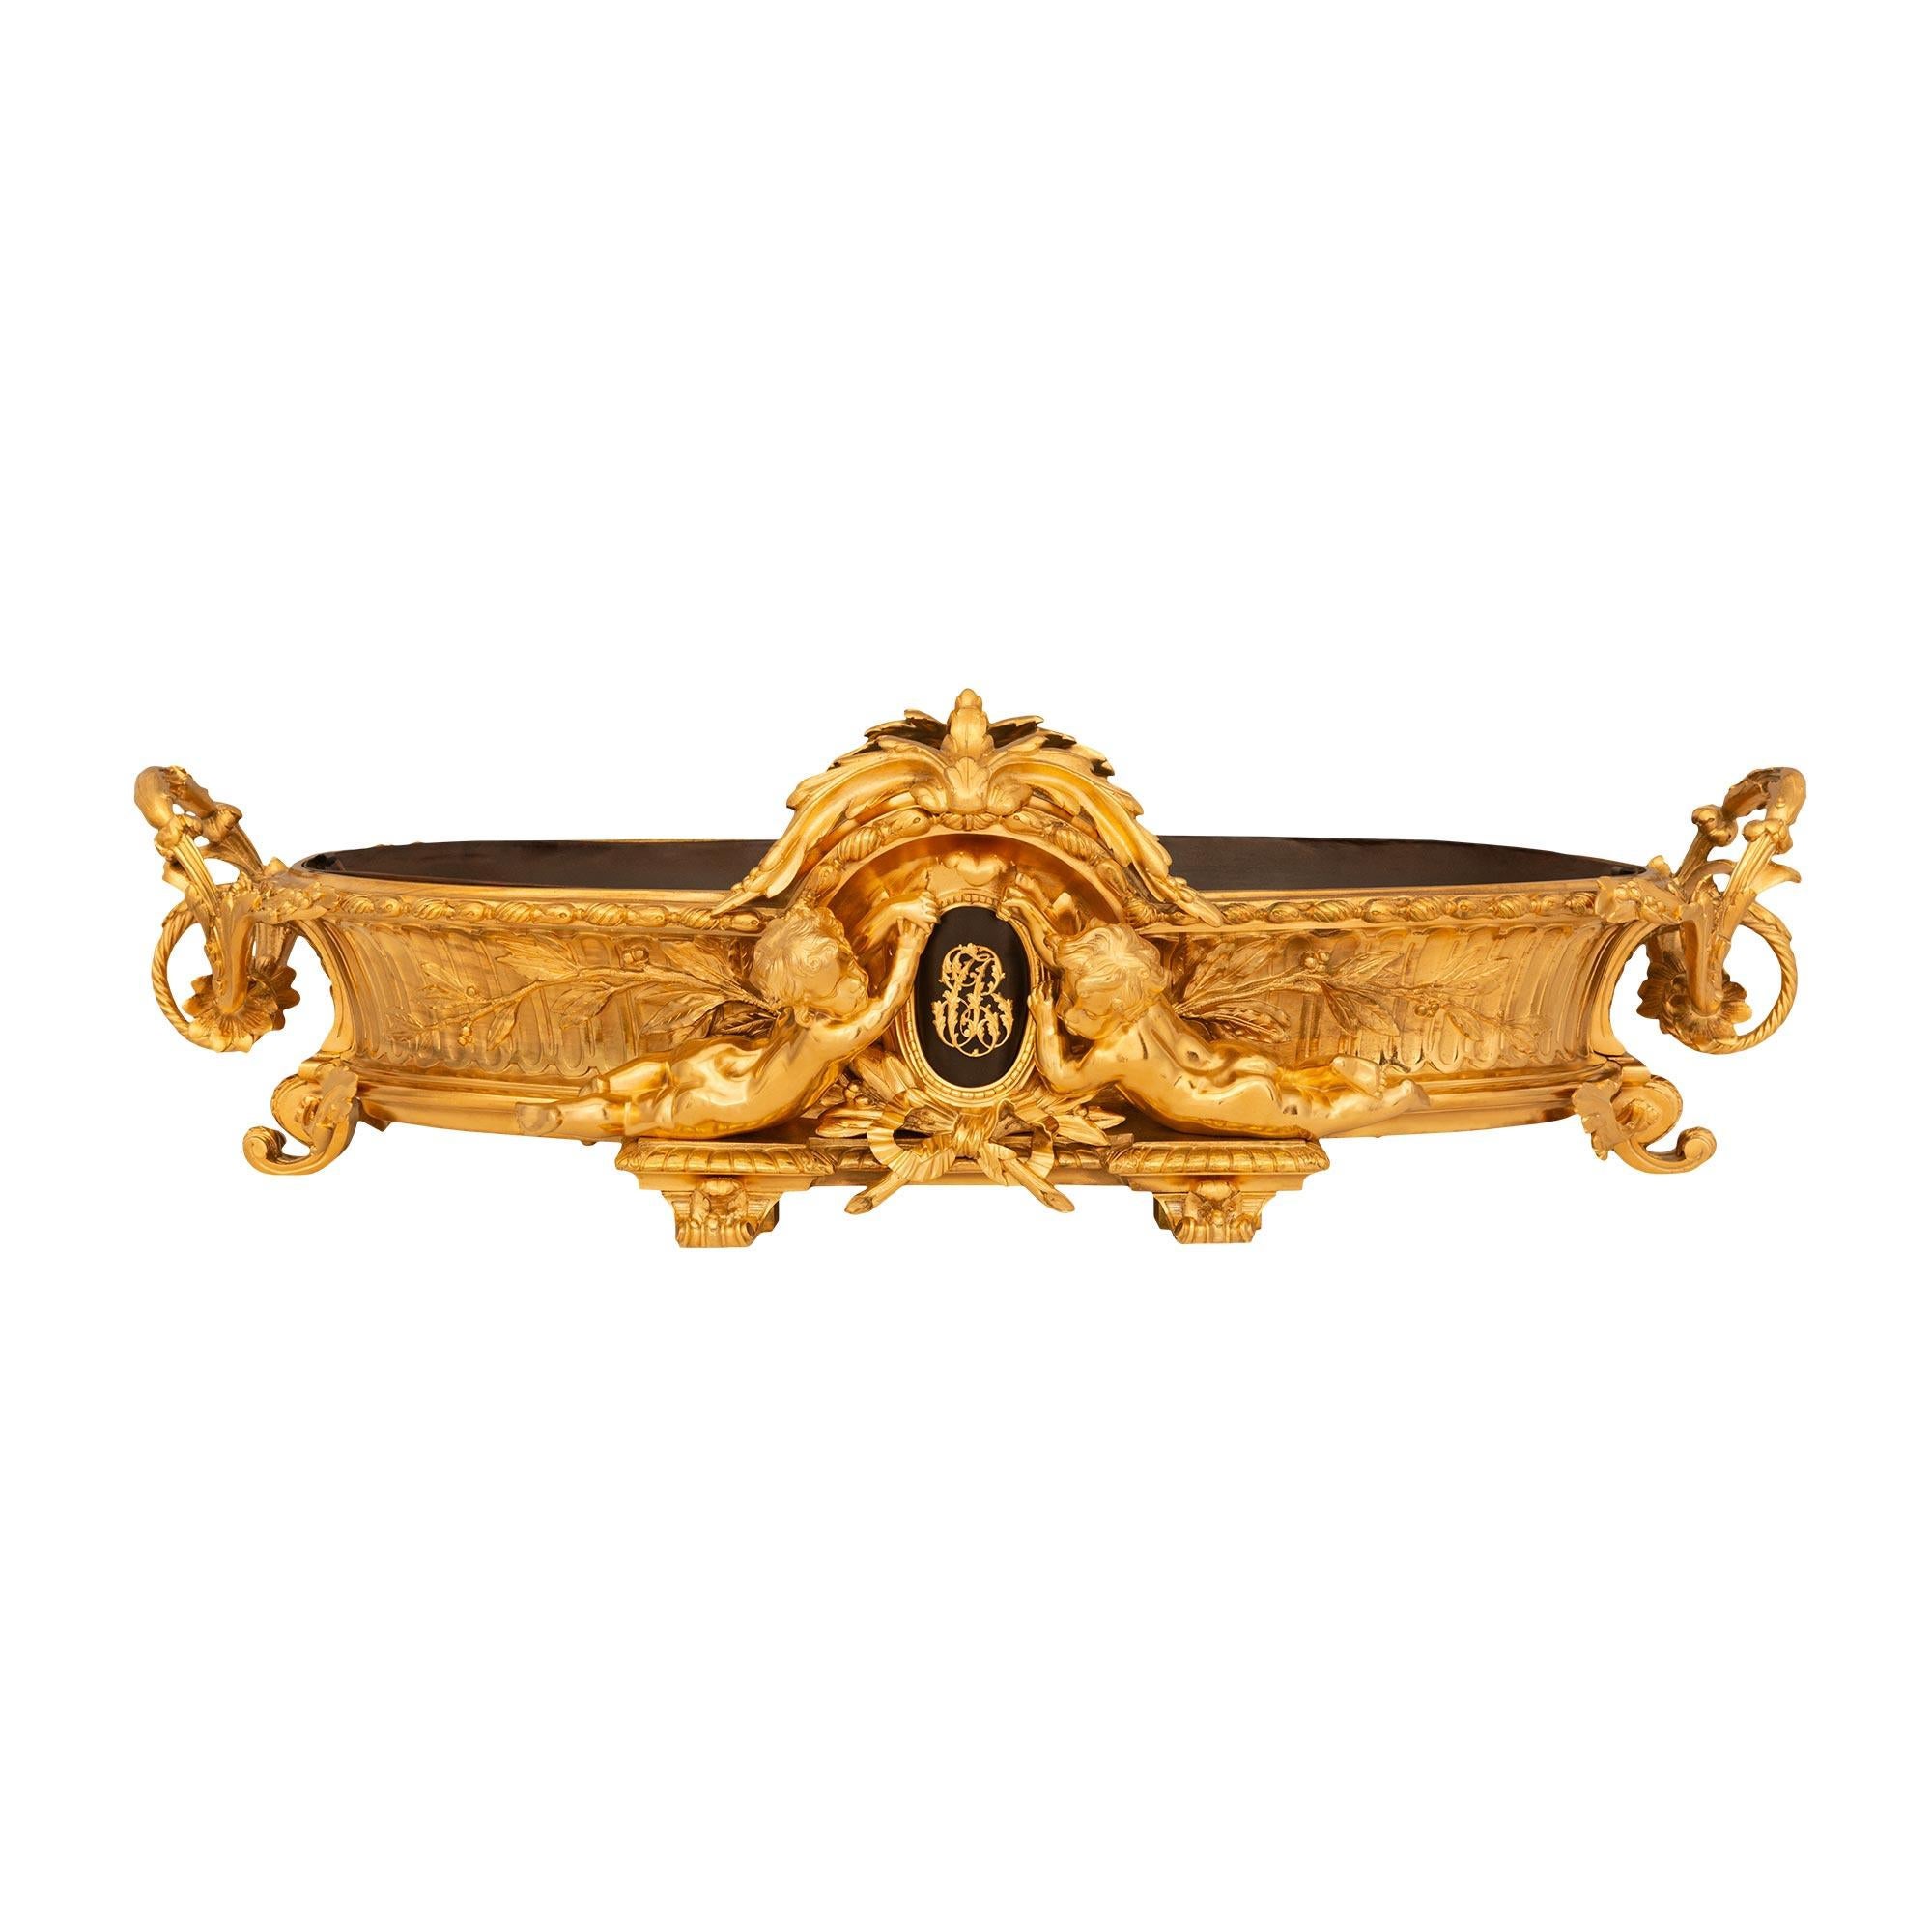 French 19th c. Napoleon III Period Ormolu, Patinated Bronze, & Tole Centerpiece For Sale